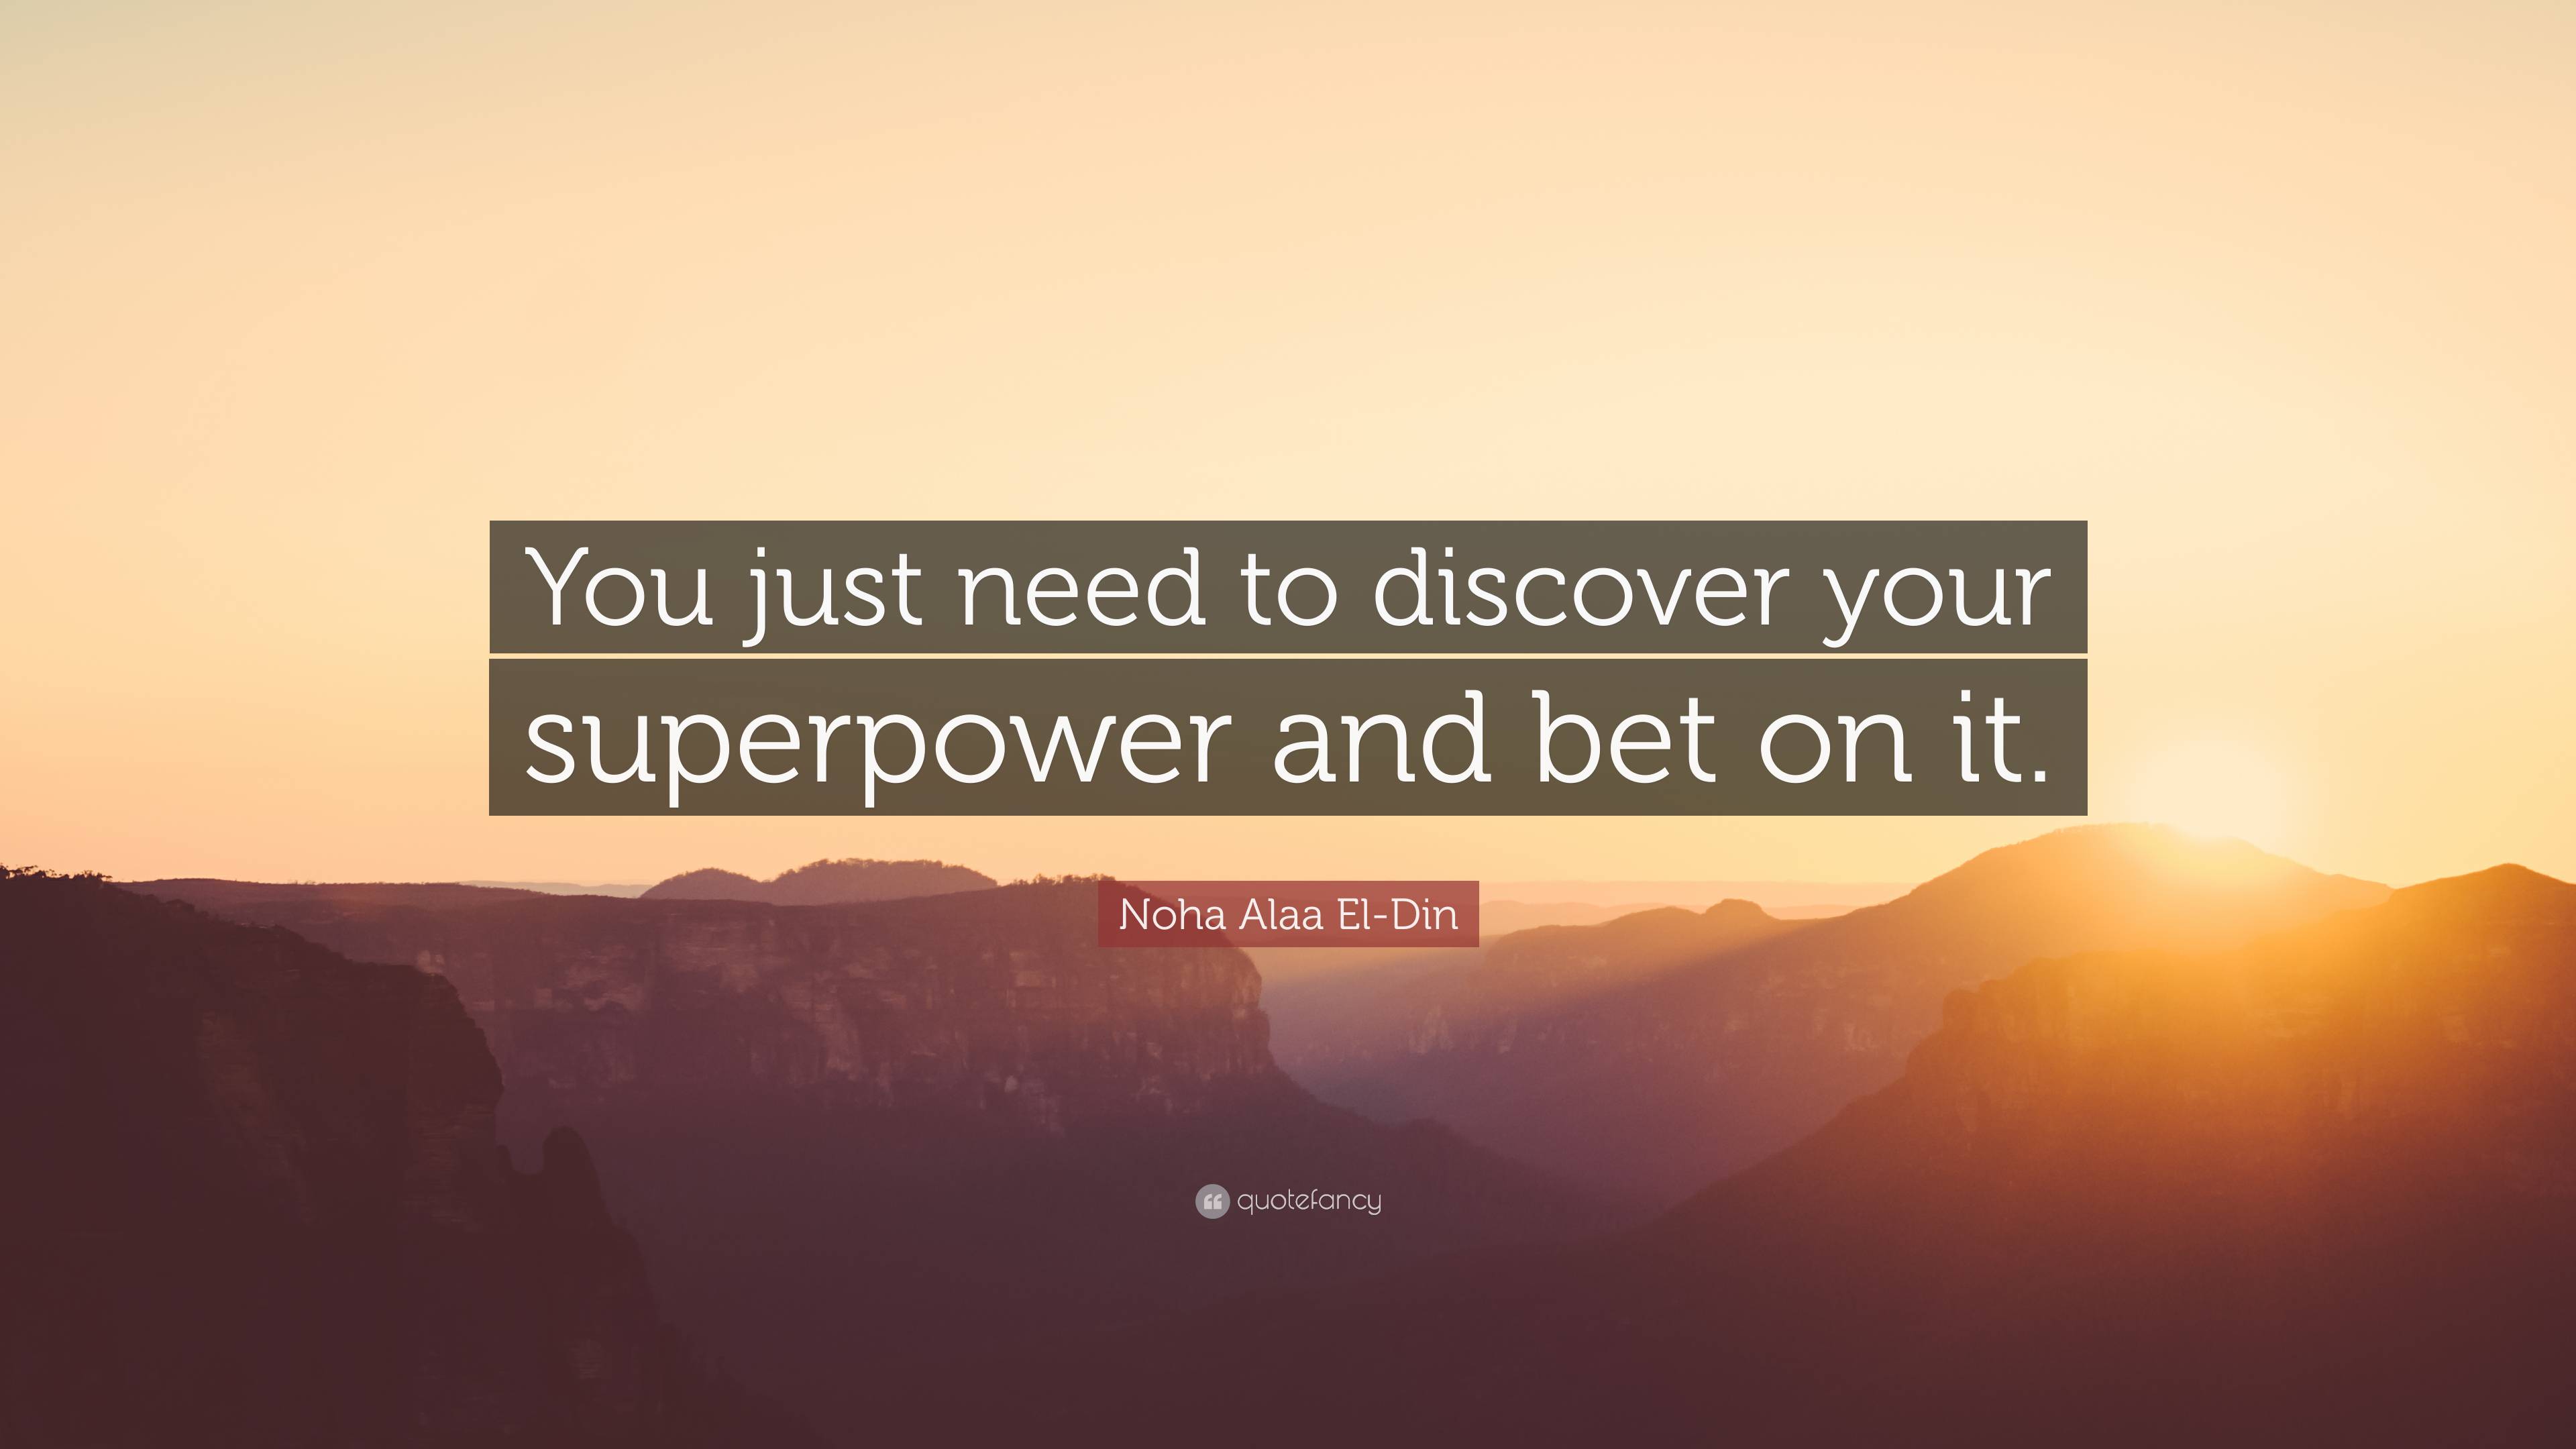 Noha Alaa El-Din Quote: “You just need to discover your superpower